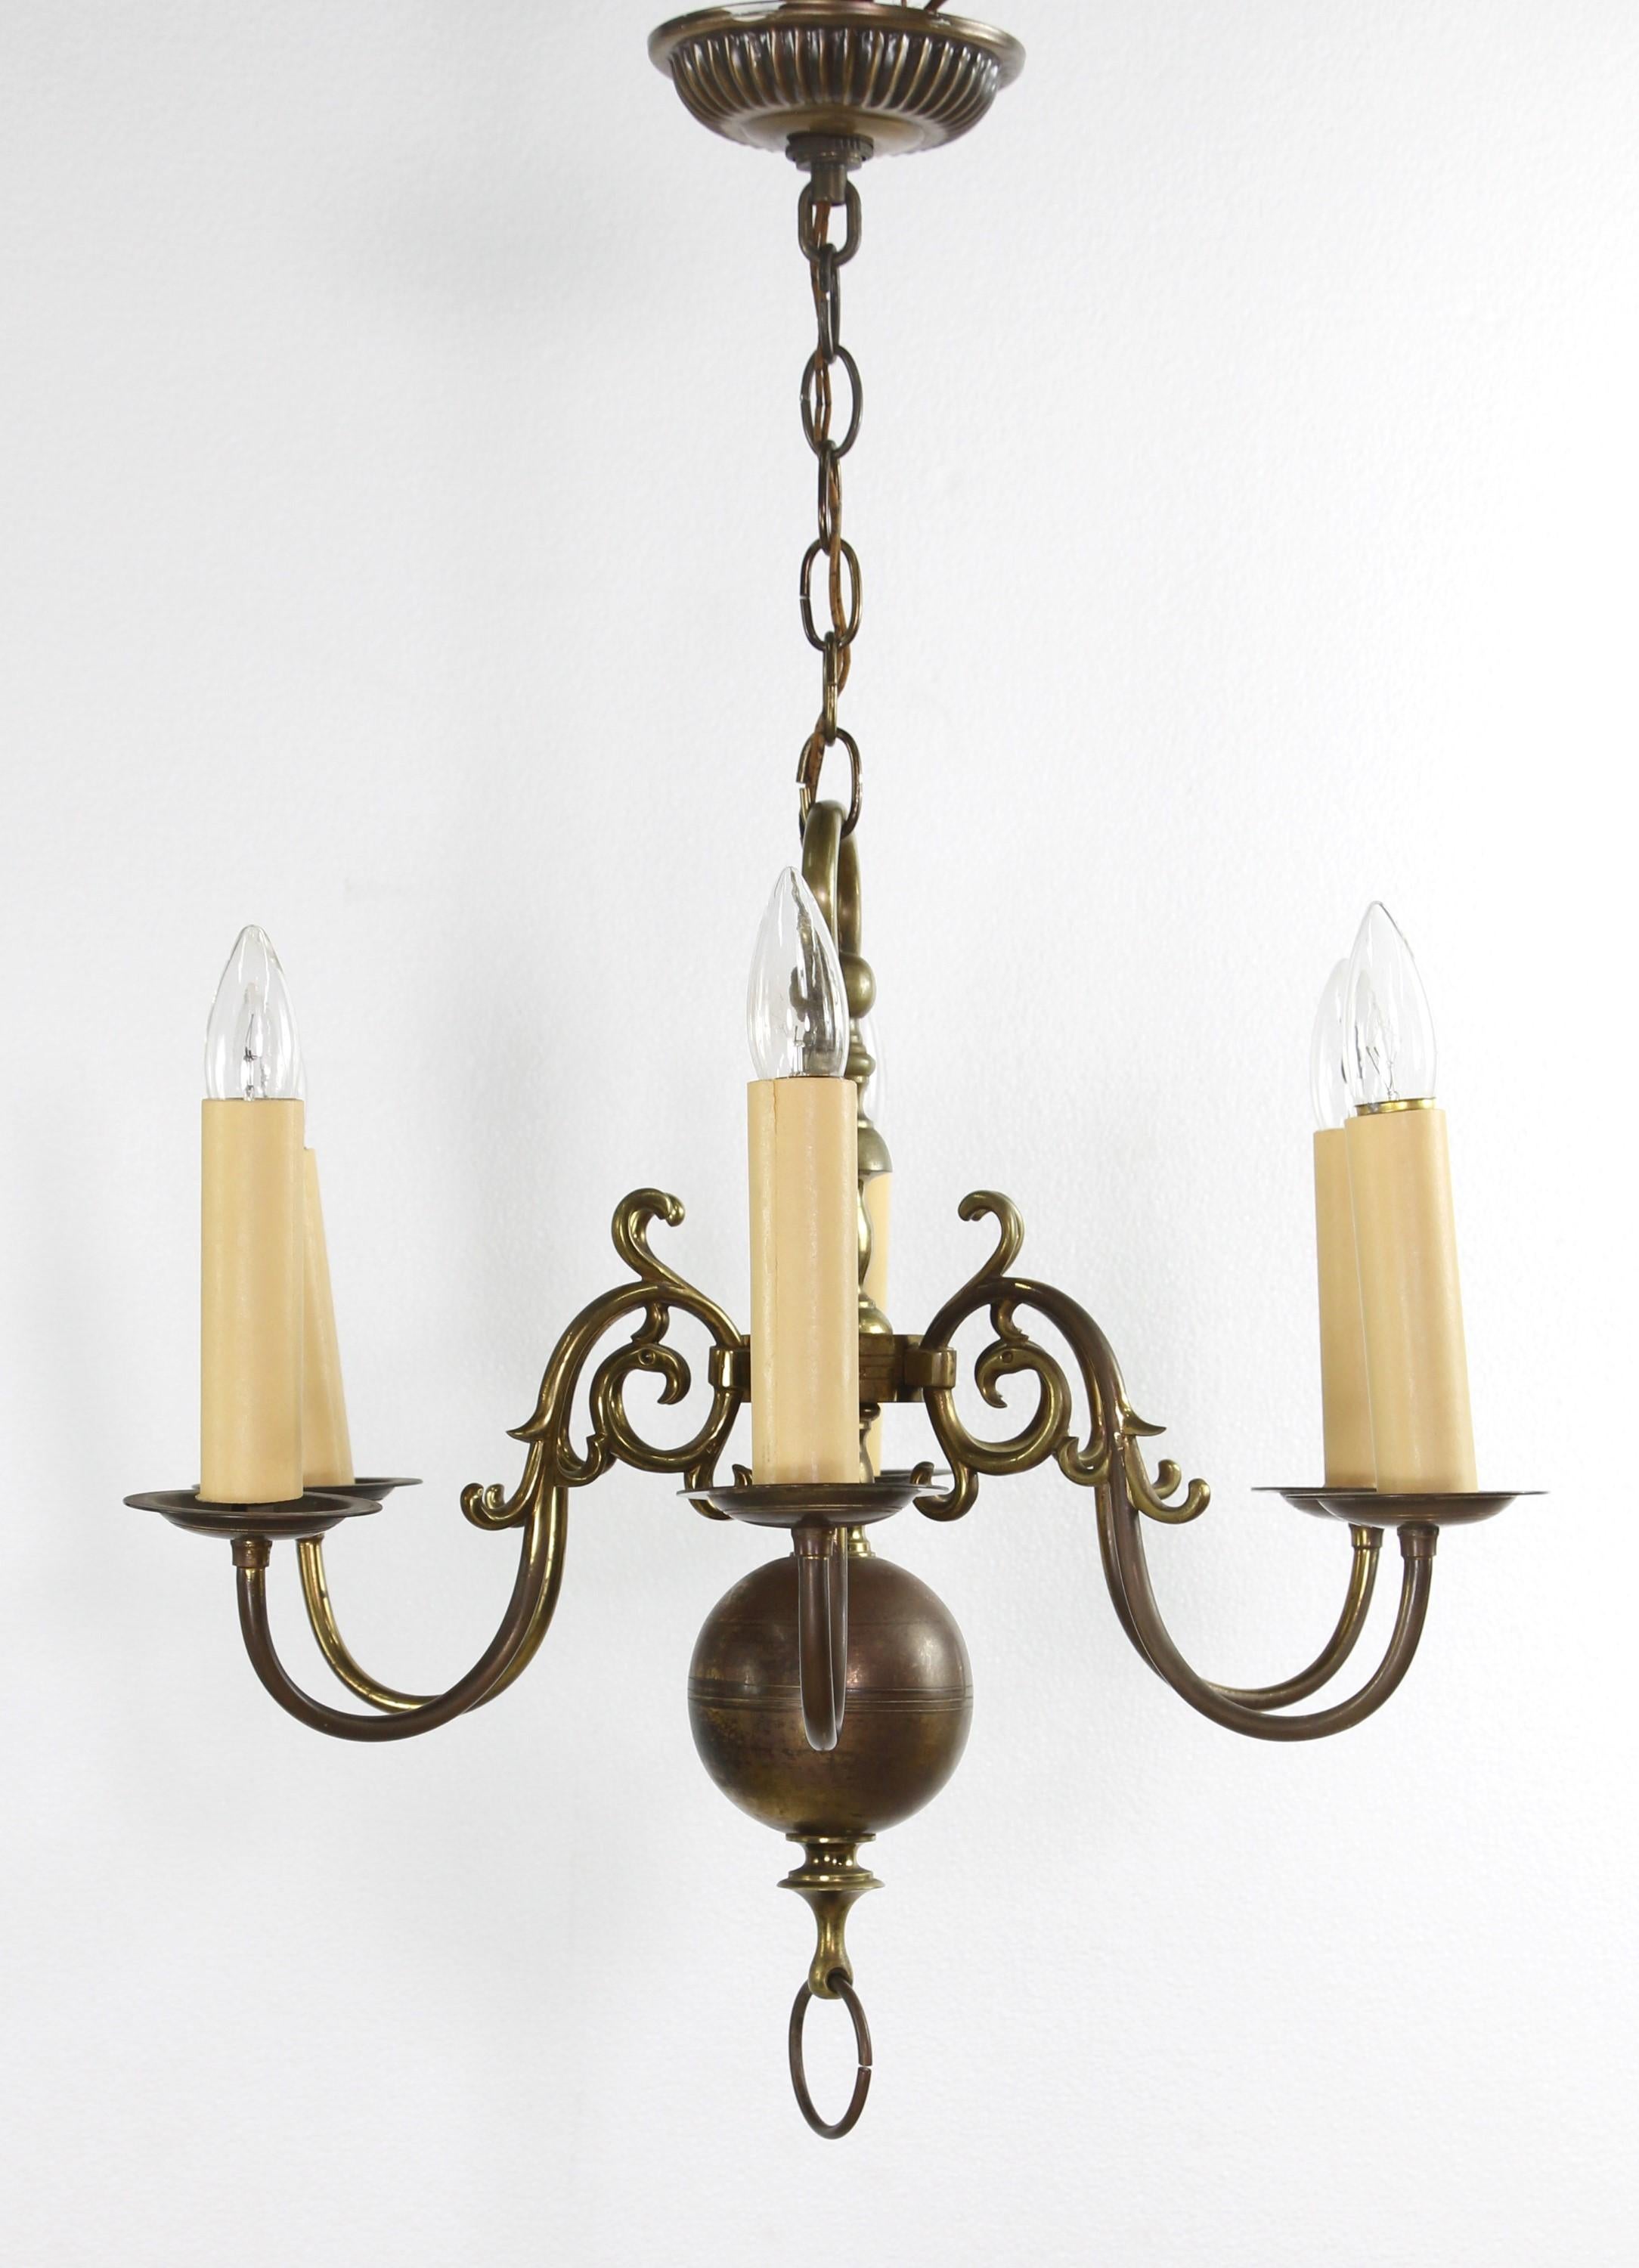 Petite cast brass Williamsburg chandelier with polished brass and warm brass patina and six candlestick arms. This takes six standard E26 sockets. Cleaned and restored. The price includes restoration. Please note, this item is located in our